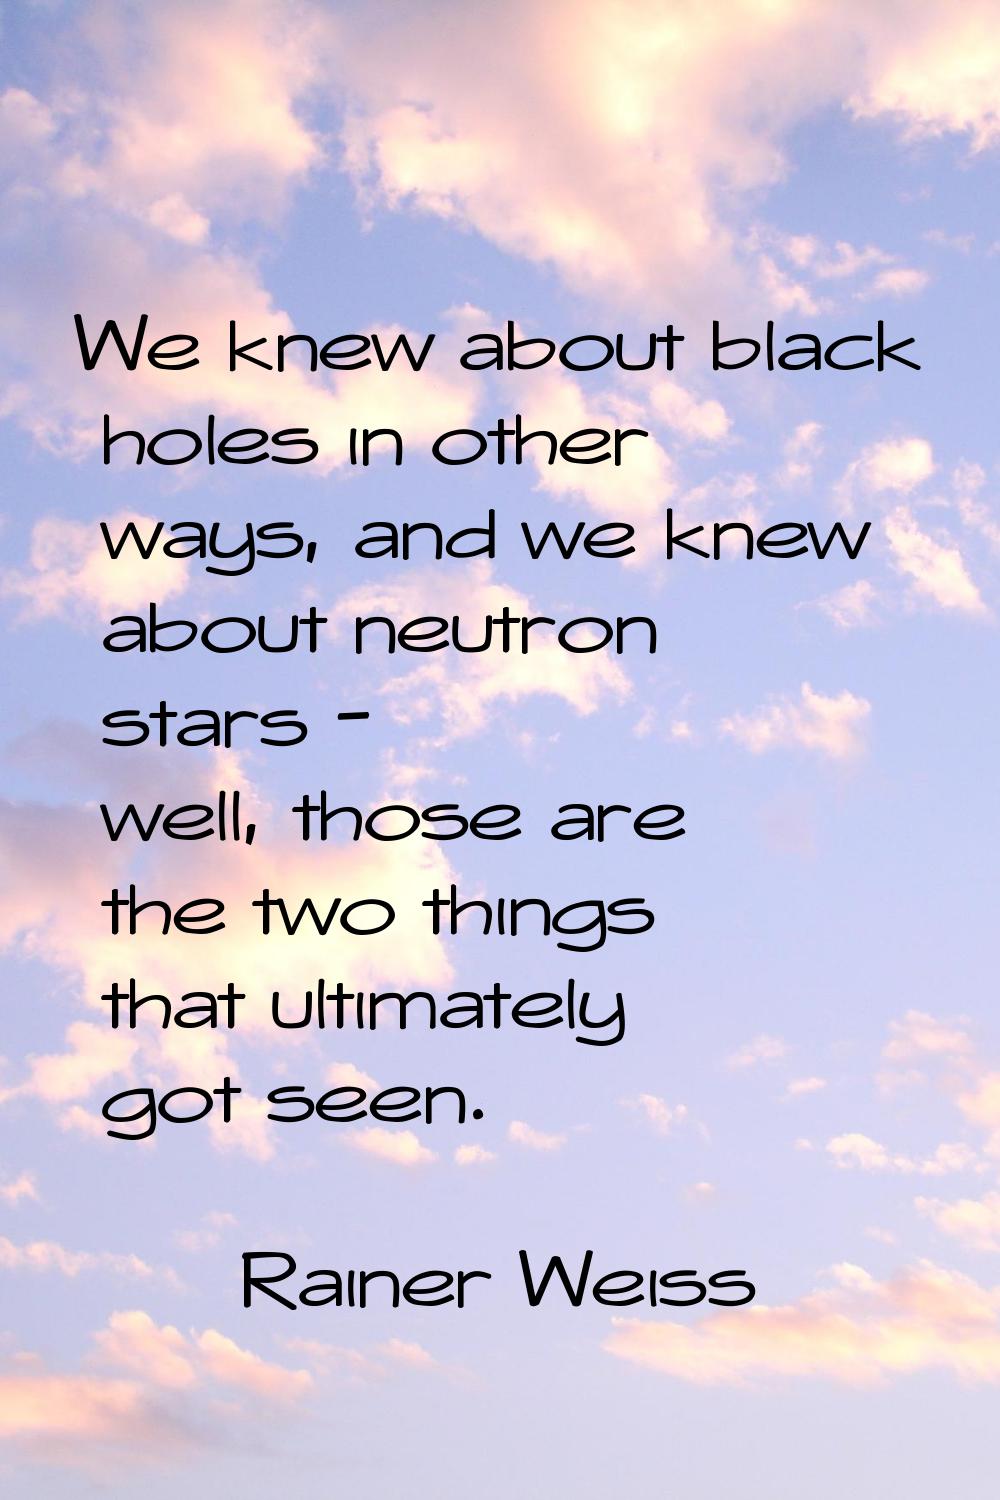 We knew about black holes in other ways, and we knew about neutron stars - well, those are the two 